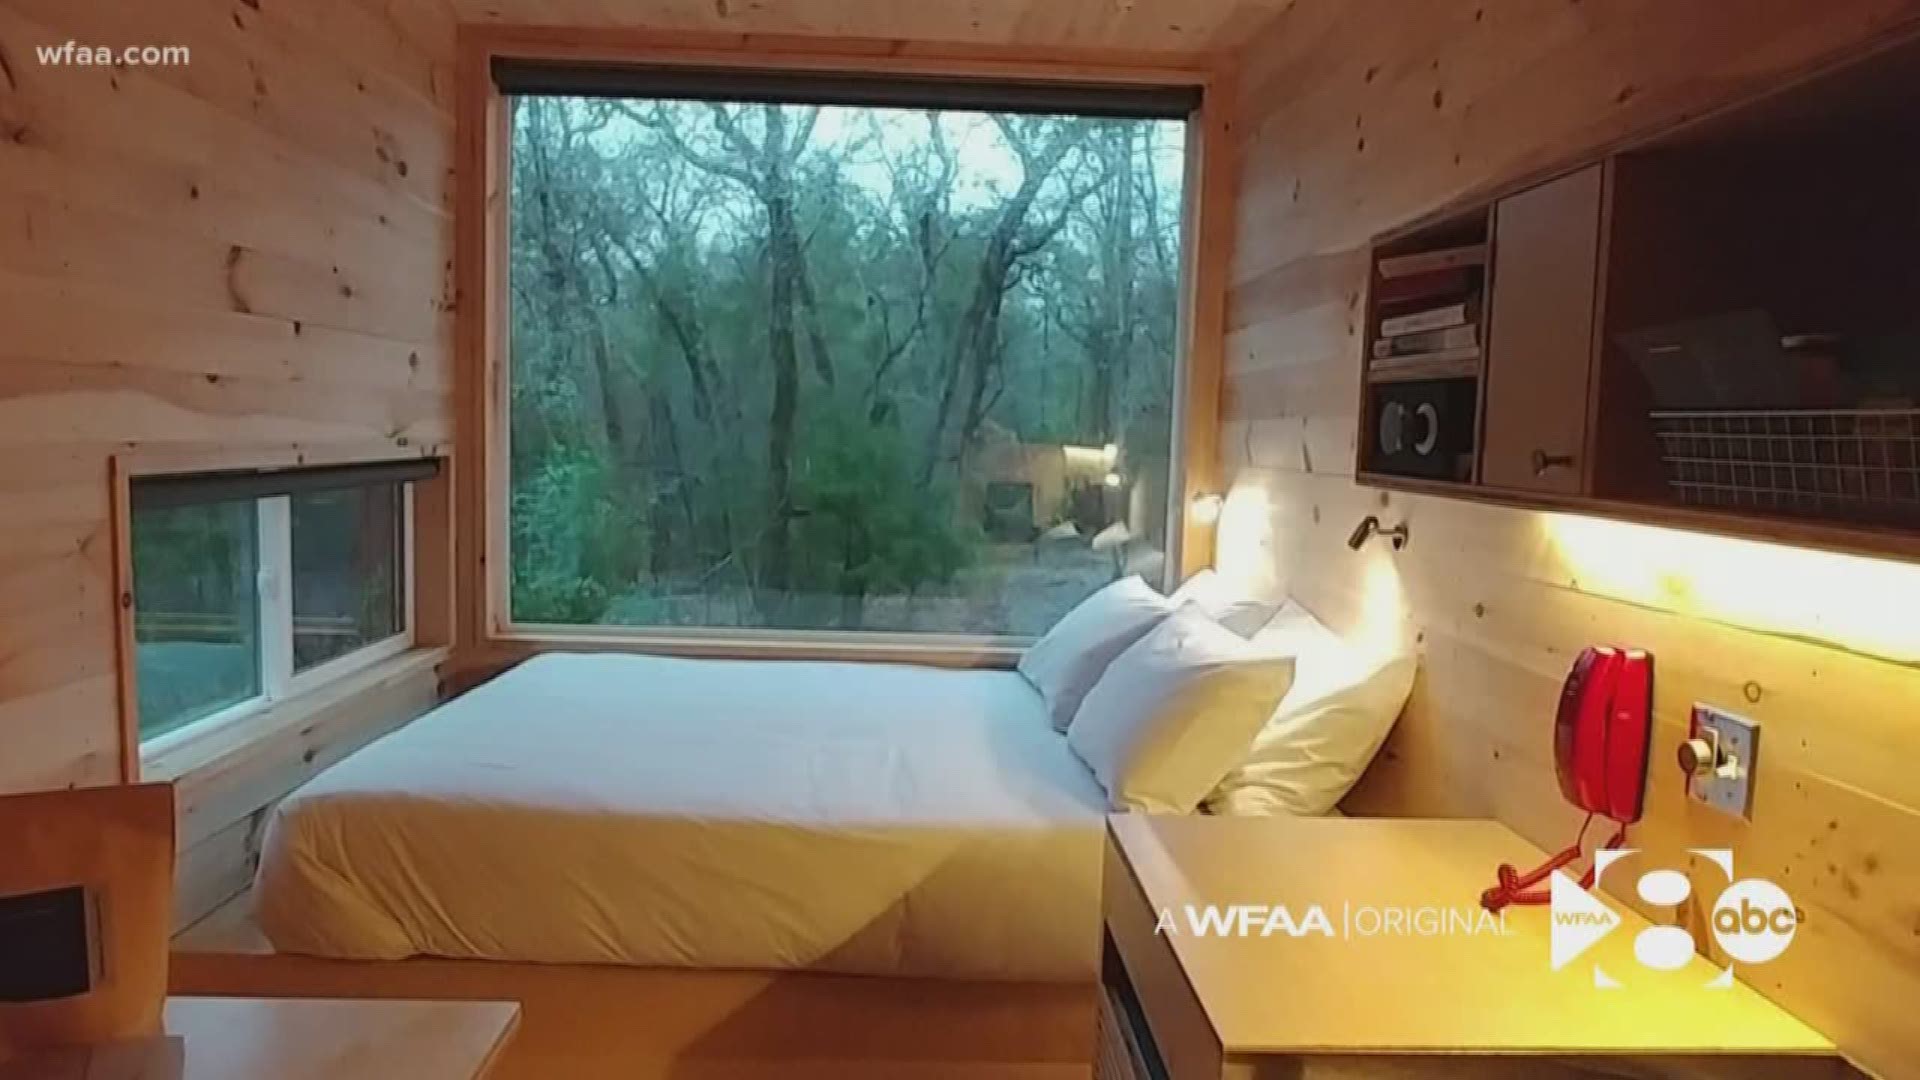 North Texans can now escape to 44 tiny cabins in the middle of the woods about 90 minutes from Dallas.